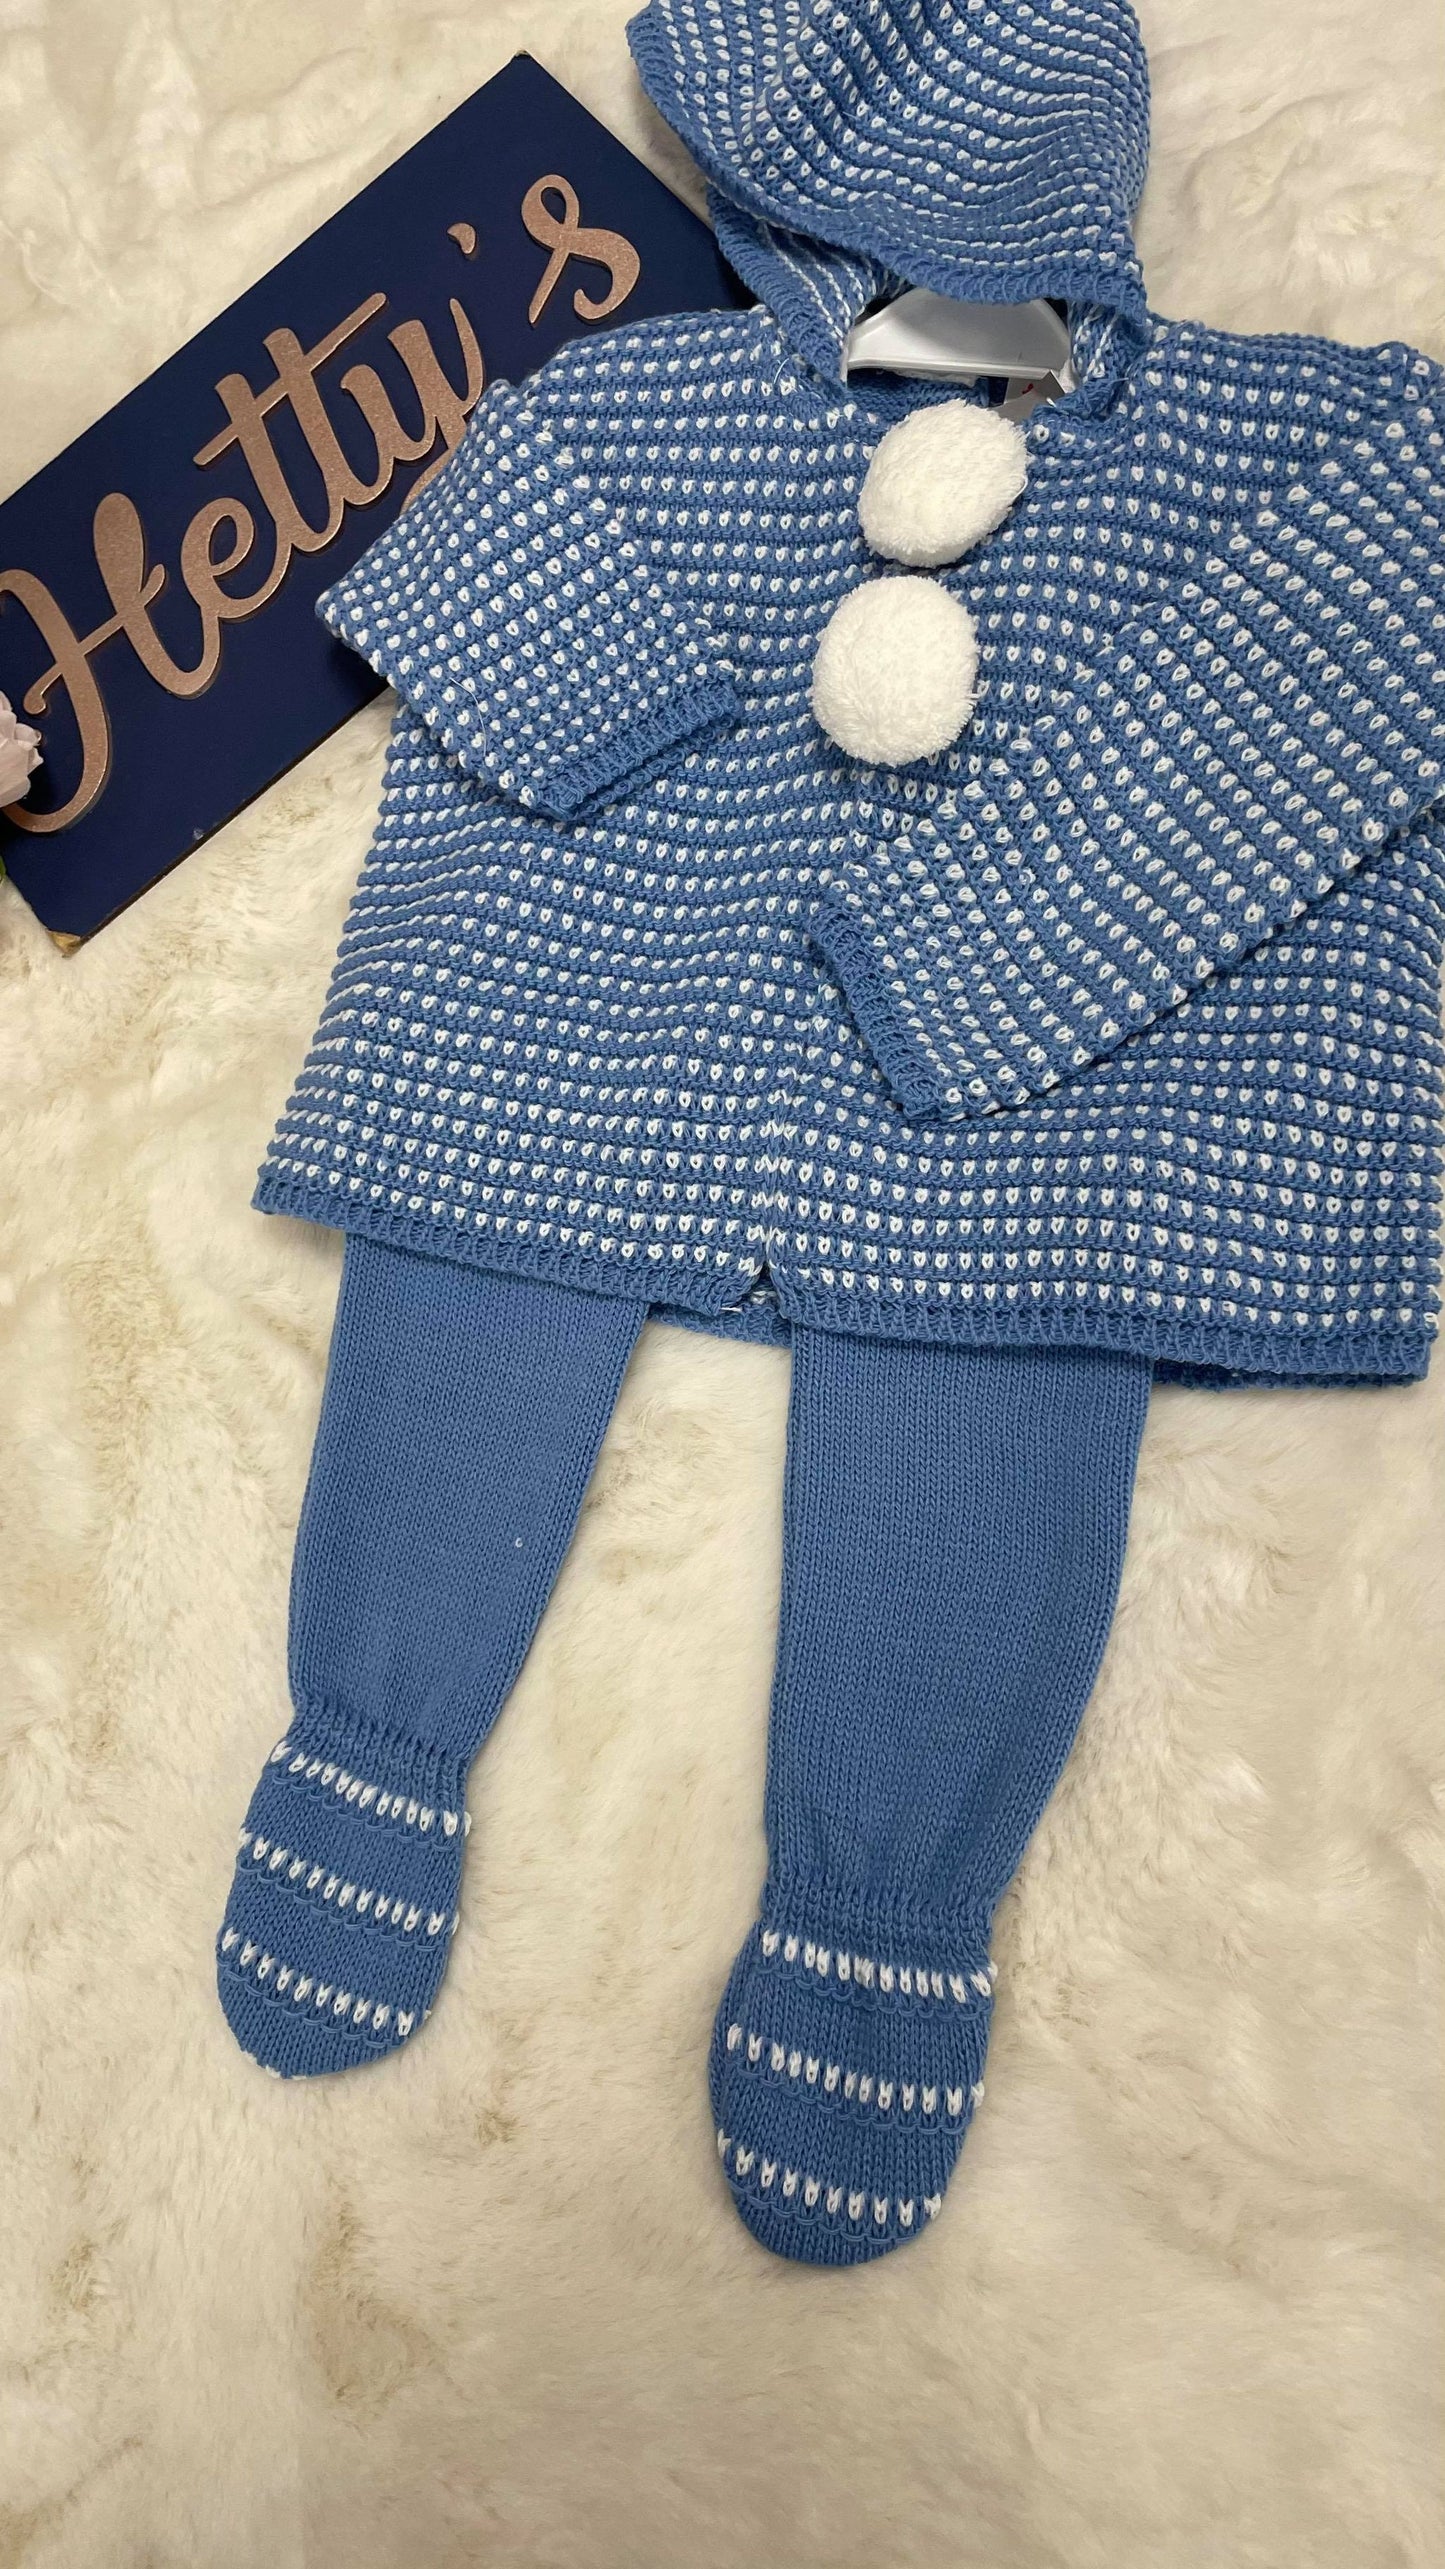 Patterned Knitted Pram Suit